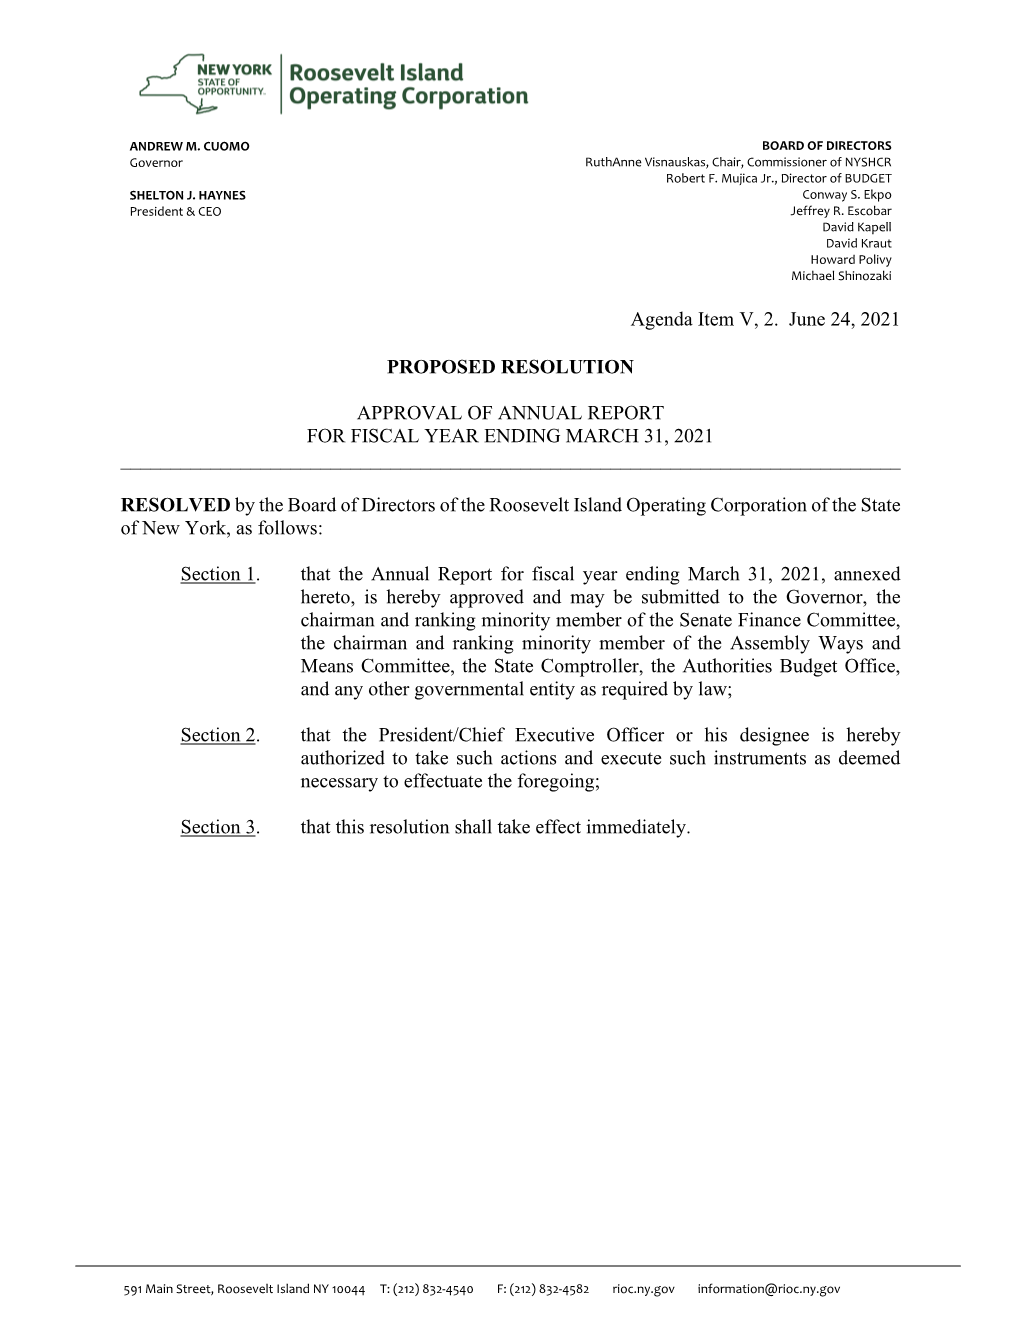 Agenda Item V, 2. June 24, 2021 PROPOSED RESOLUTION APPROVAL of ANNUAL REPORT for FISCAL YEAR ENDING MARCH 31, 2021